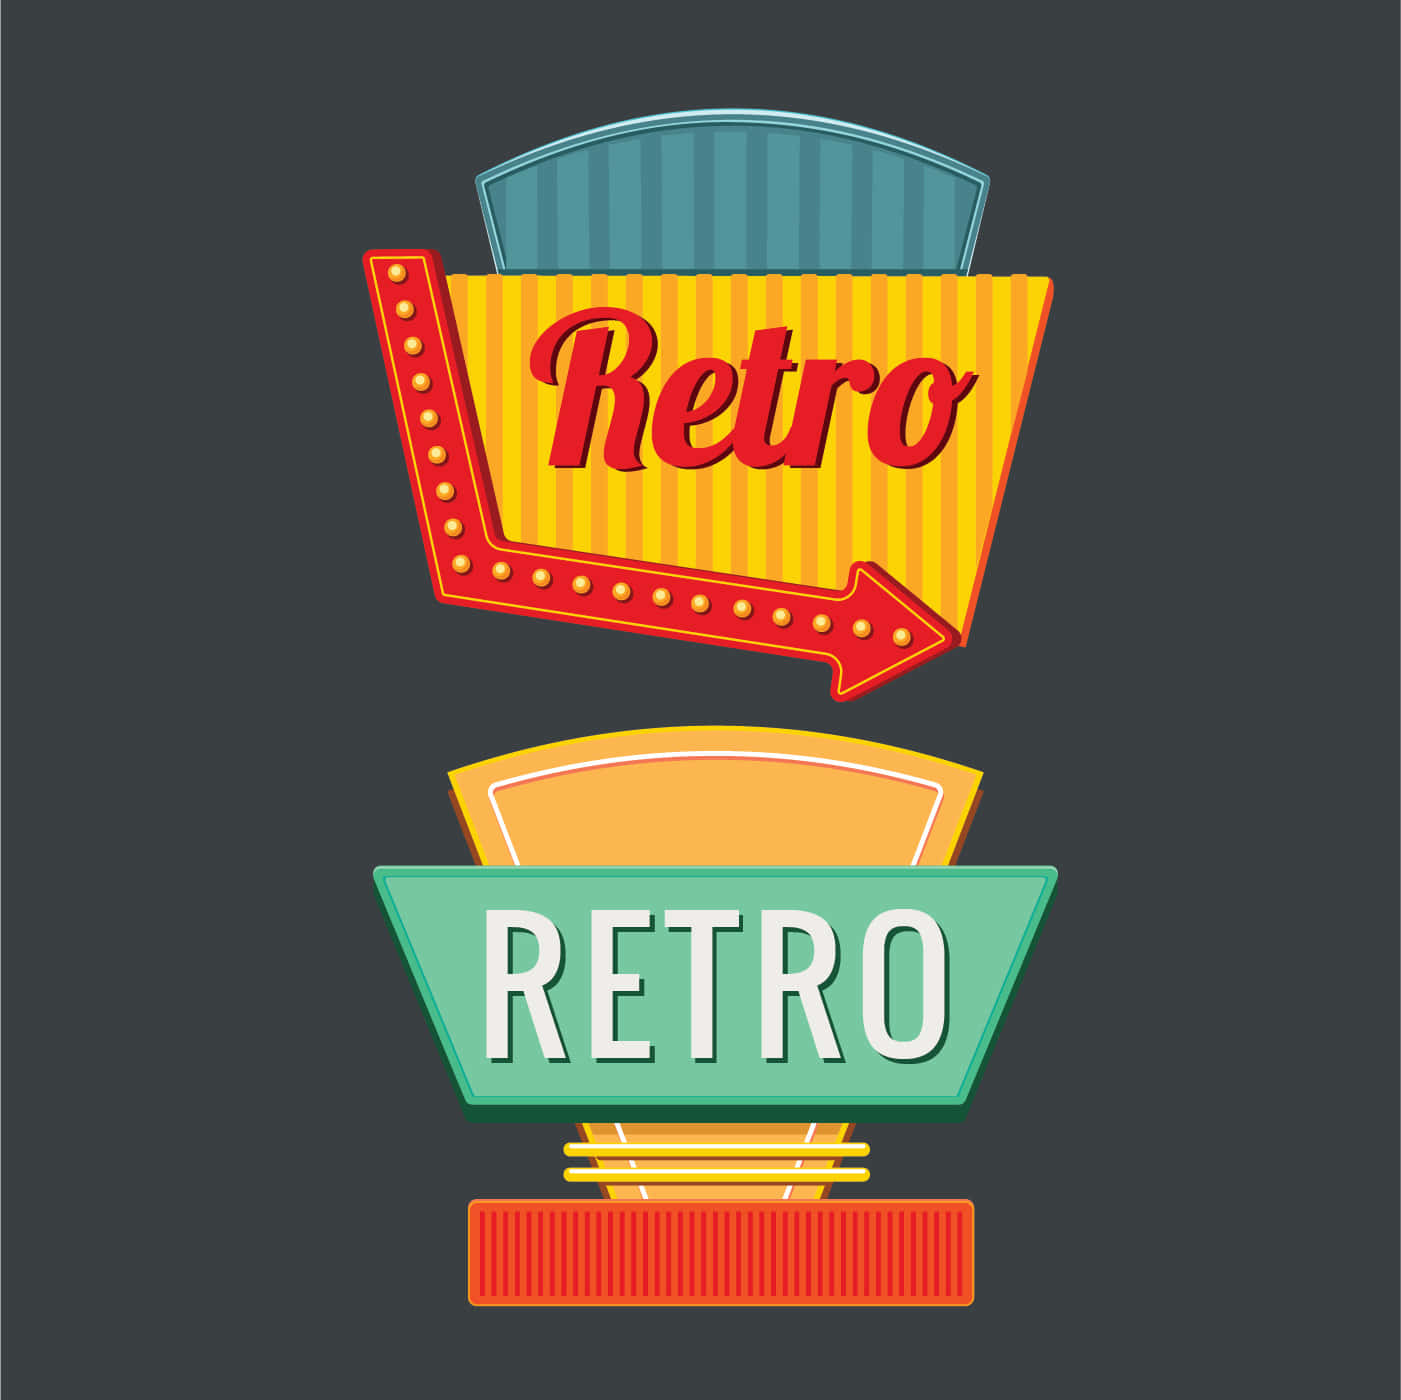 Classic Vintage Signs Collection Wallpaper